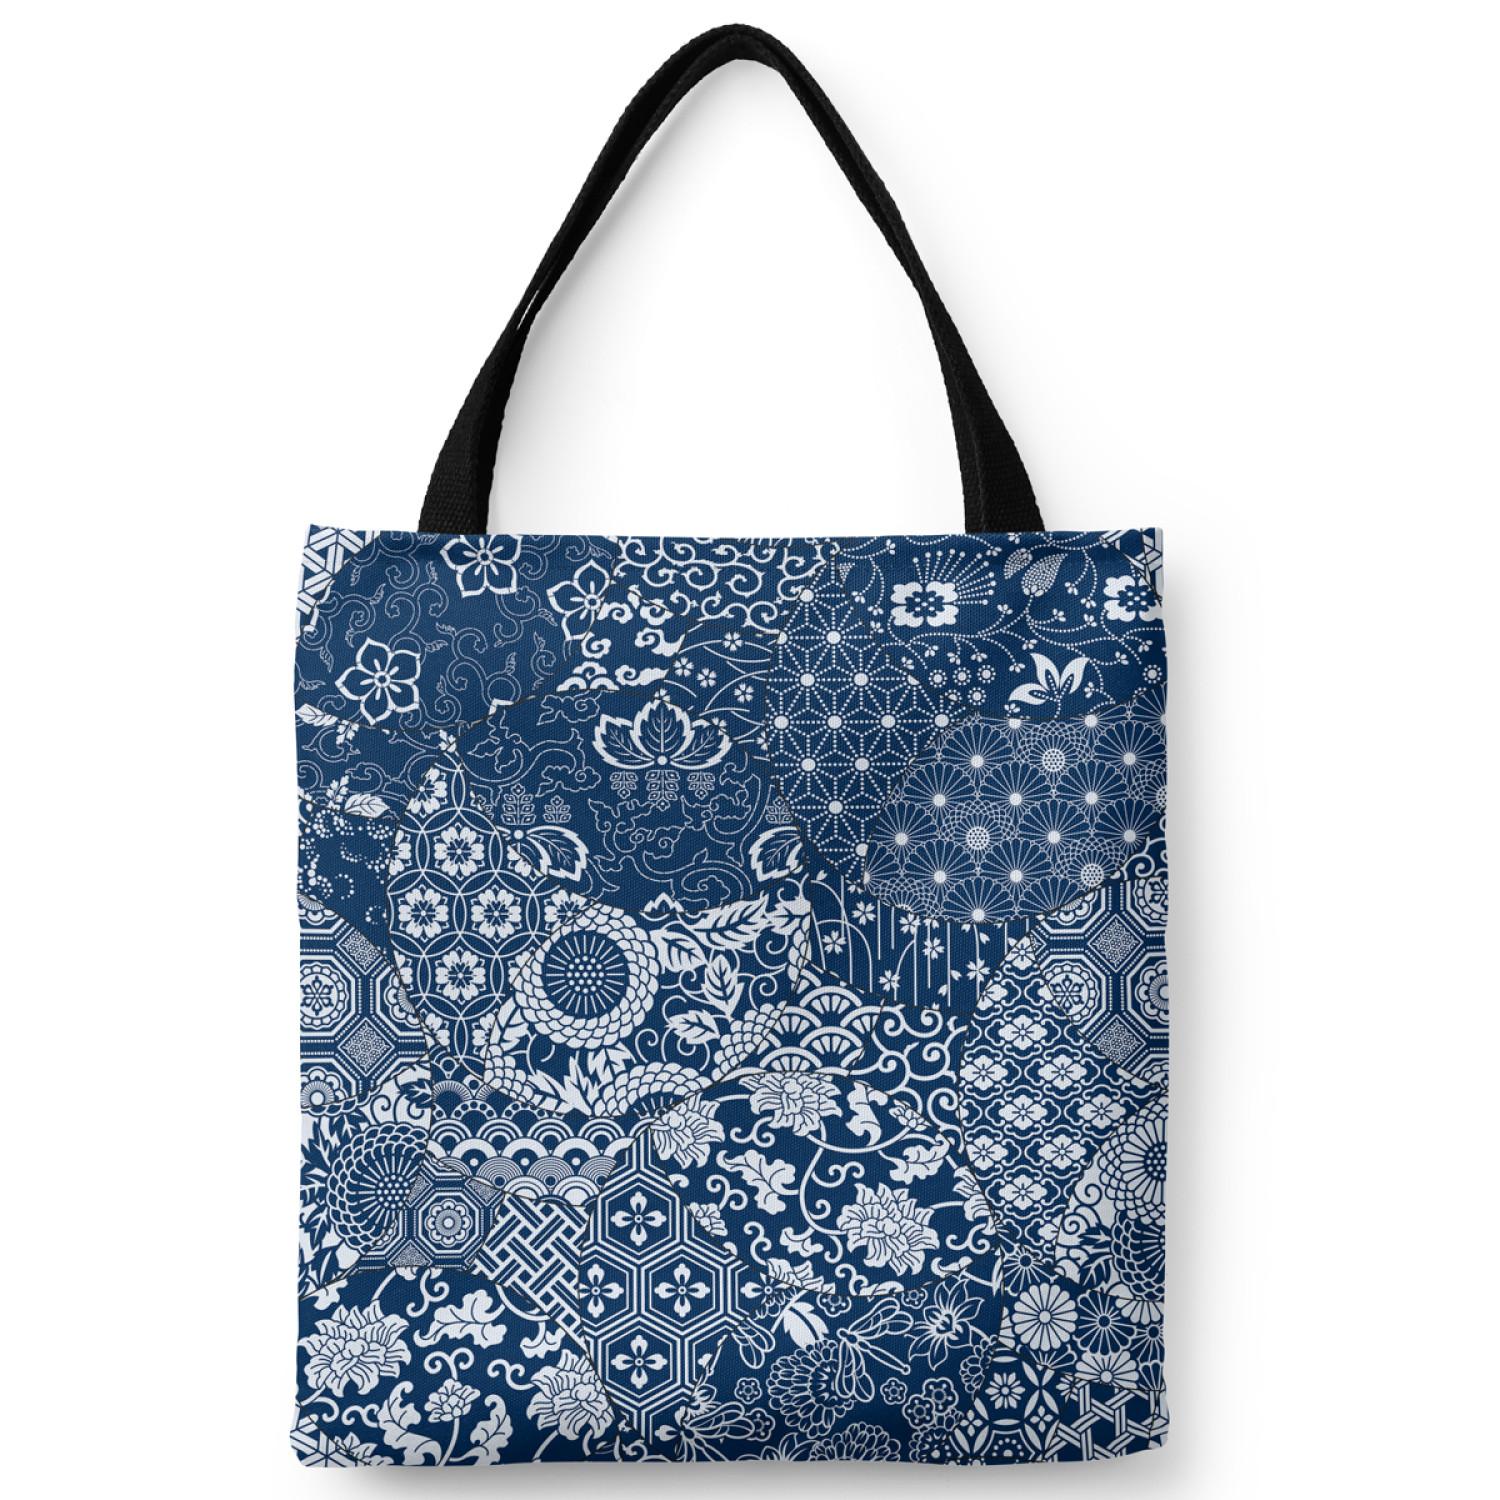 Shopping Bag Floral mosaic - composition in shades of blue and white